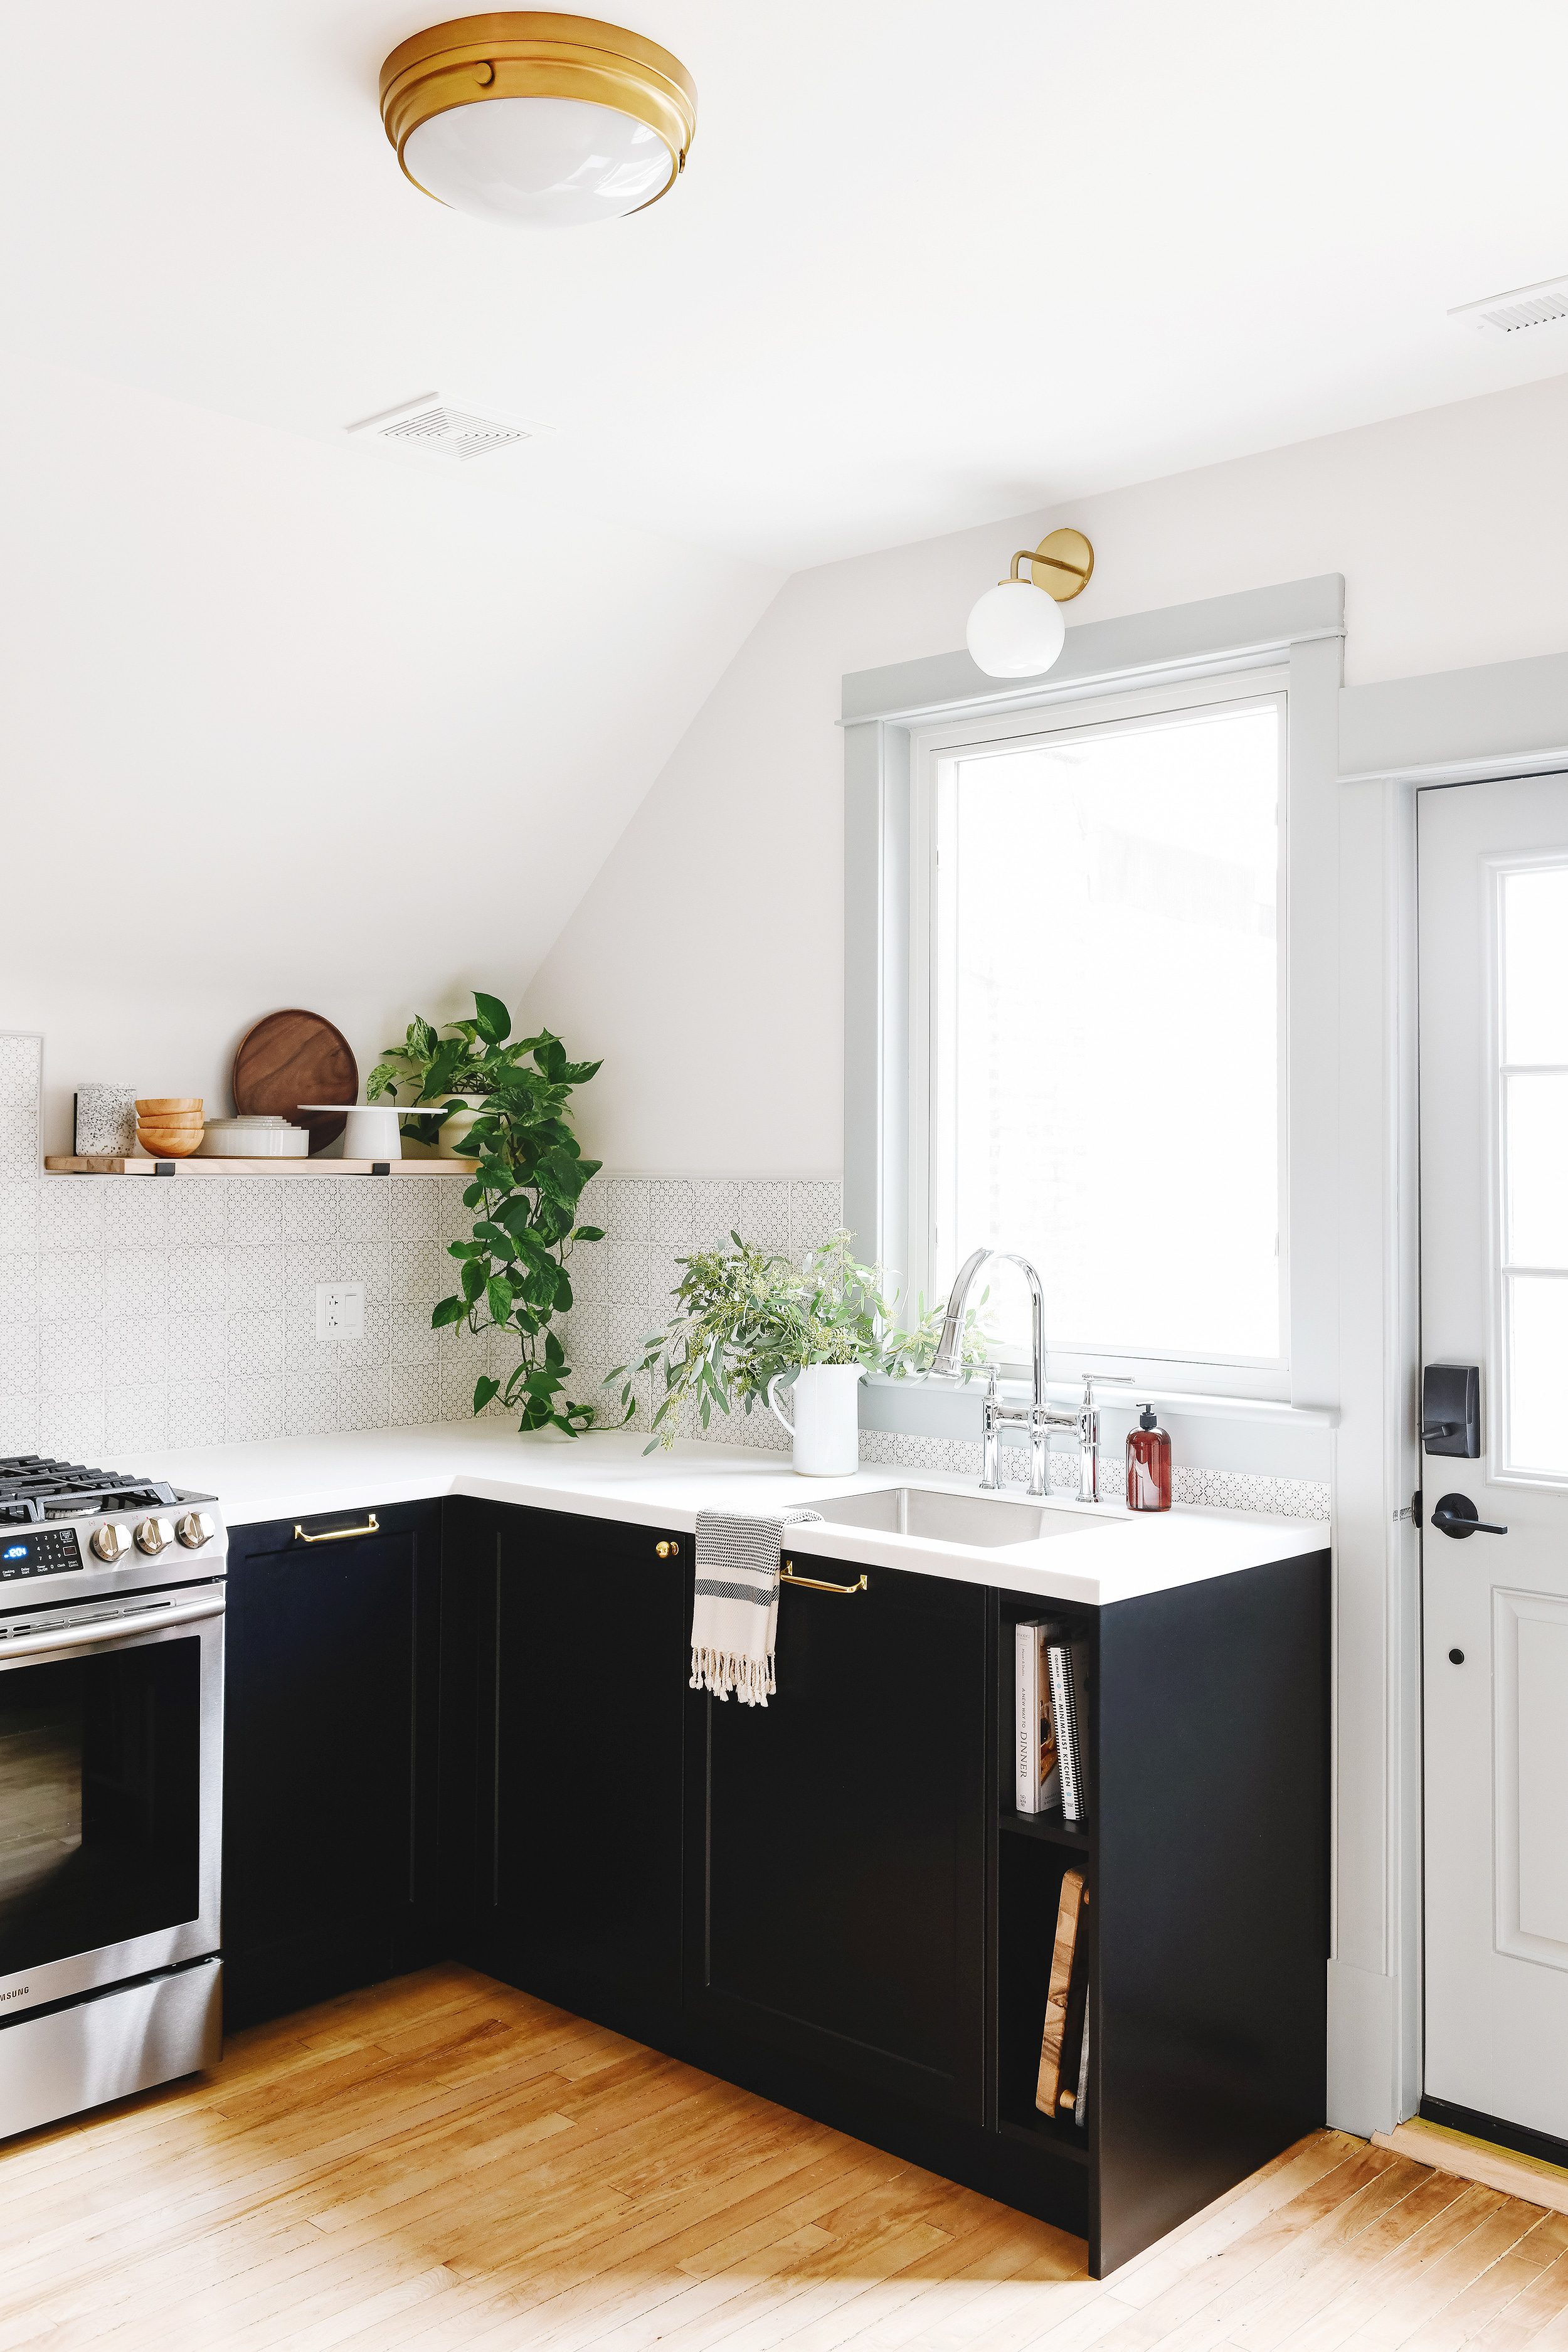 The Two Flat's Unit 2 kitchen featuring contrasting trim, black cabinetry with white countertops, a stainless range and a chrome bridge faucet // via Yellow Brick Home